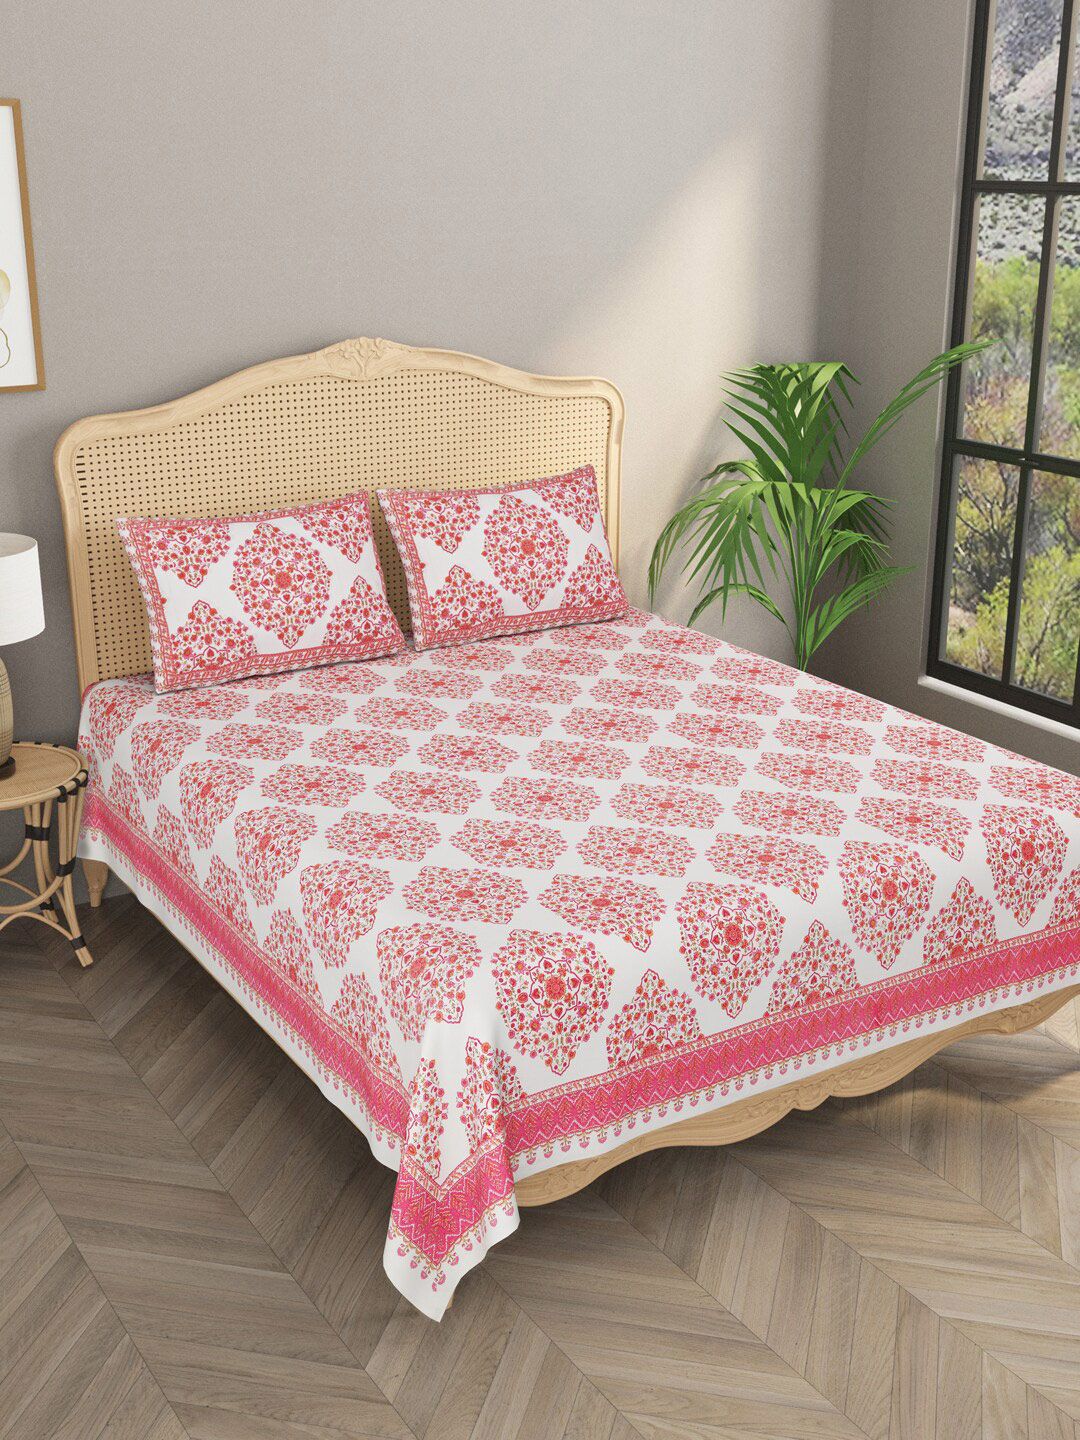 Gulaab Jaipur Red & White Ethnic Motifs 600 TC Cotton King Bedsheet with 2 Pillow Covers Price in India